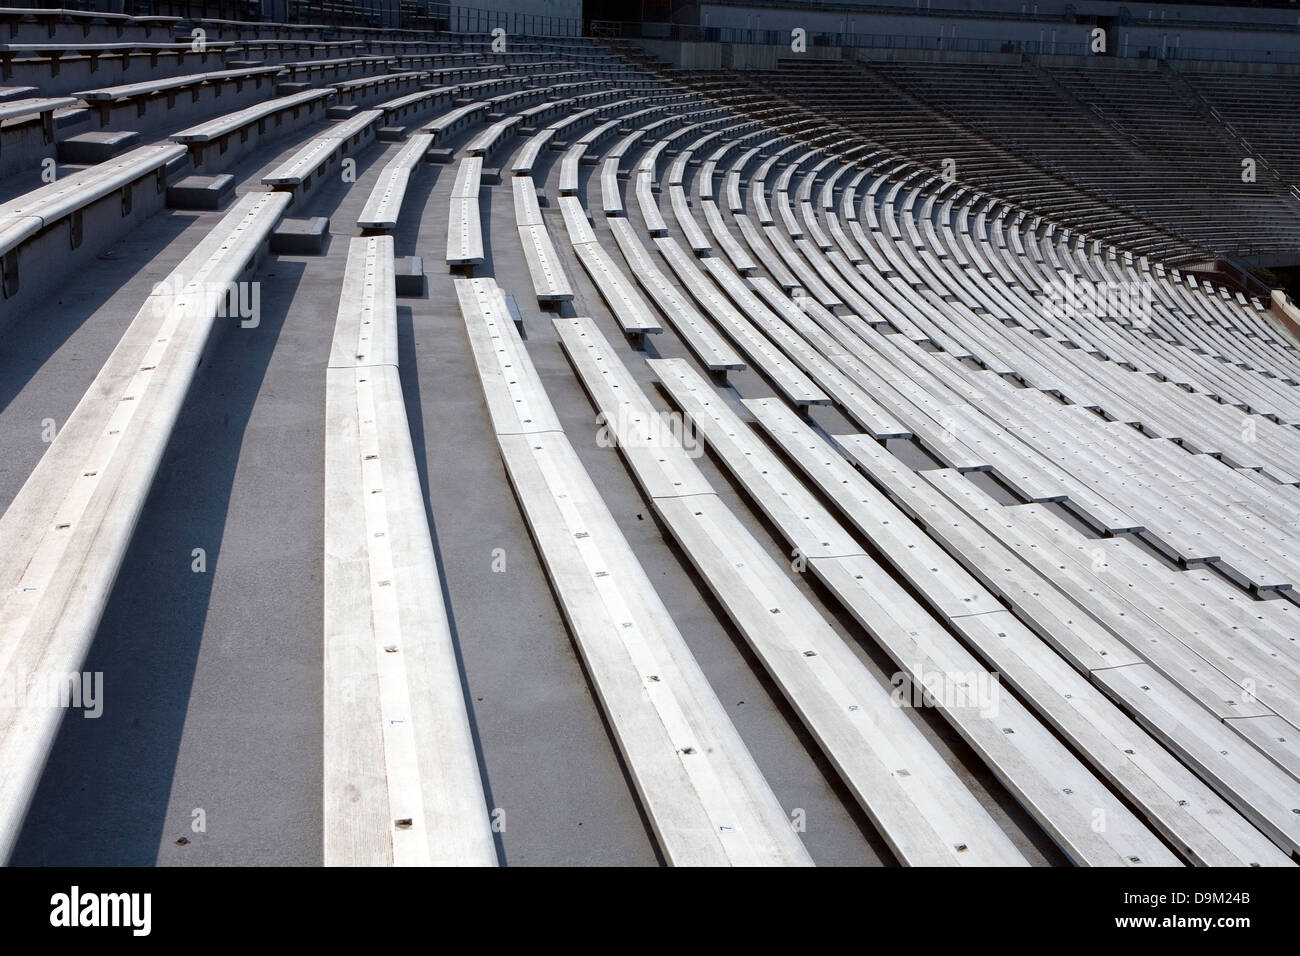 General View Of Rows Of Empty Bleacher Seating At Scott Stadium University Of Virginia On September 6 07 In Charlottesville Stock Photo Alamy